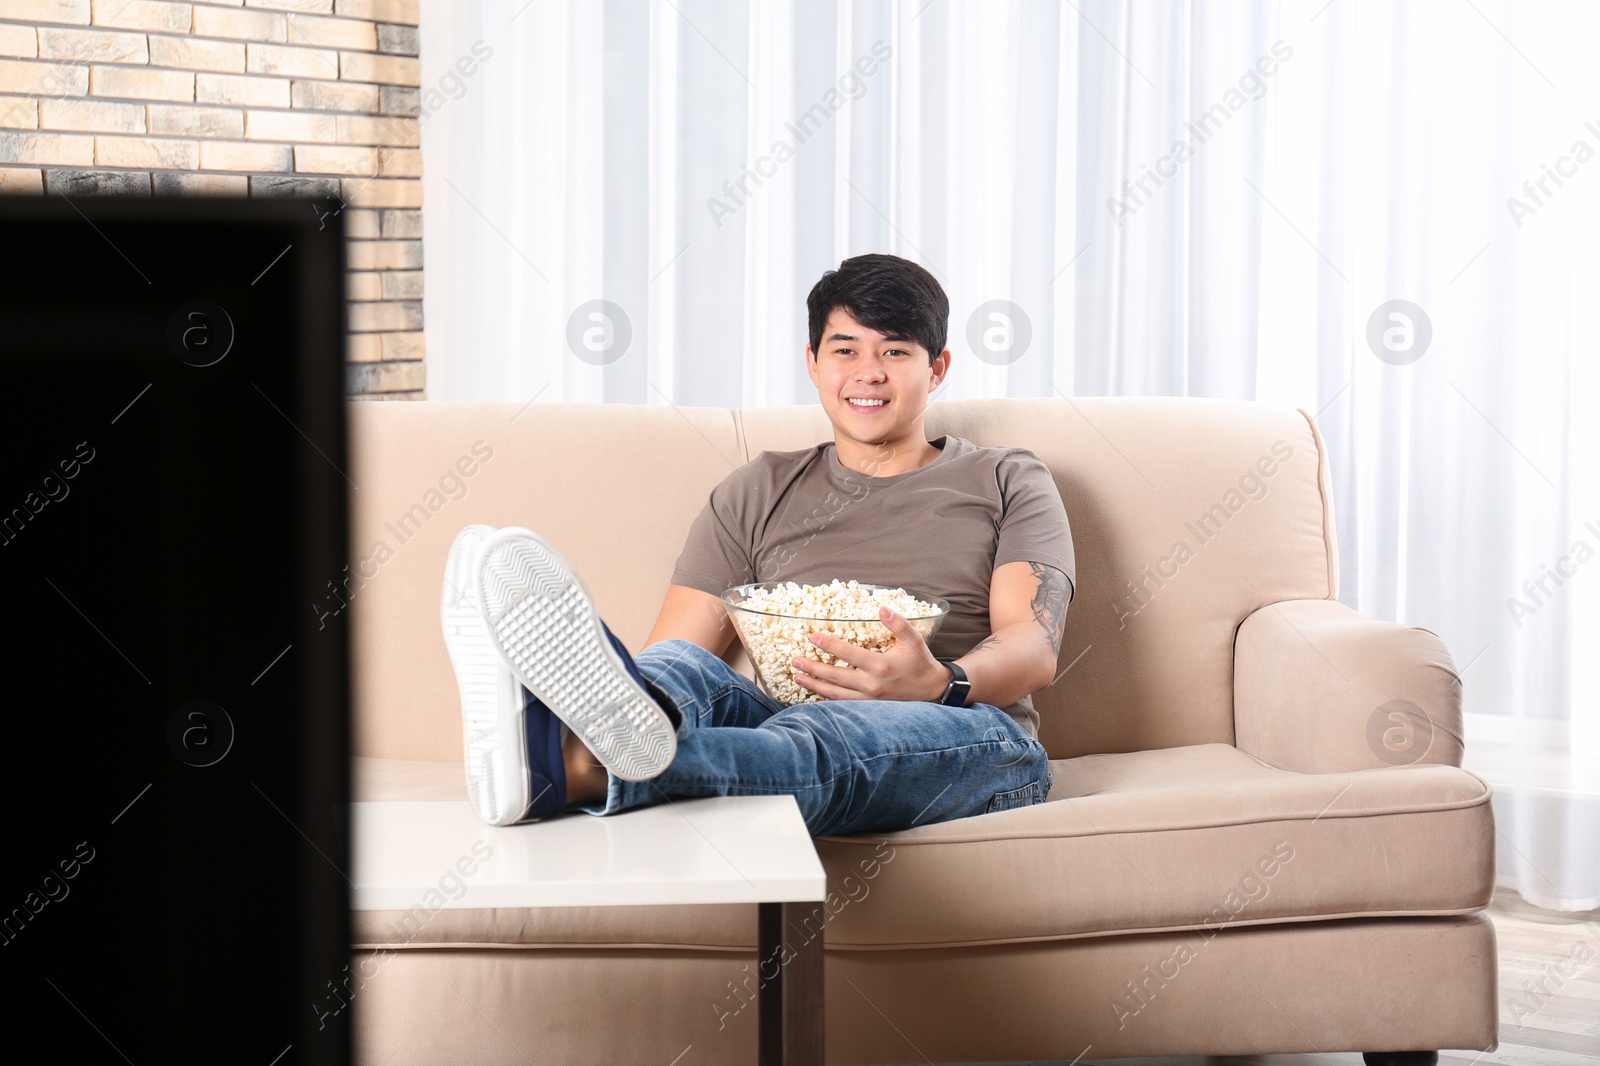 Photo of Young man with bowl of popcorn watching TV on sofa at home